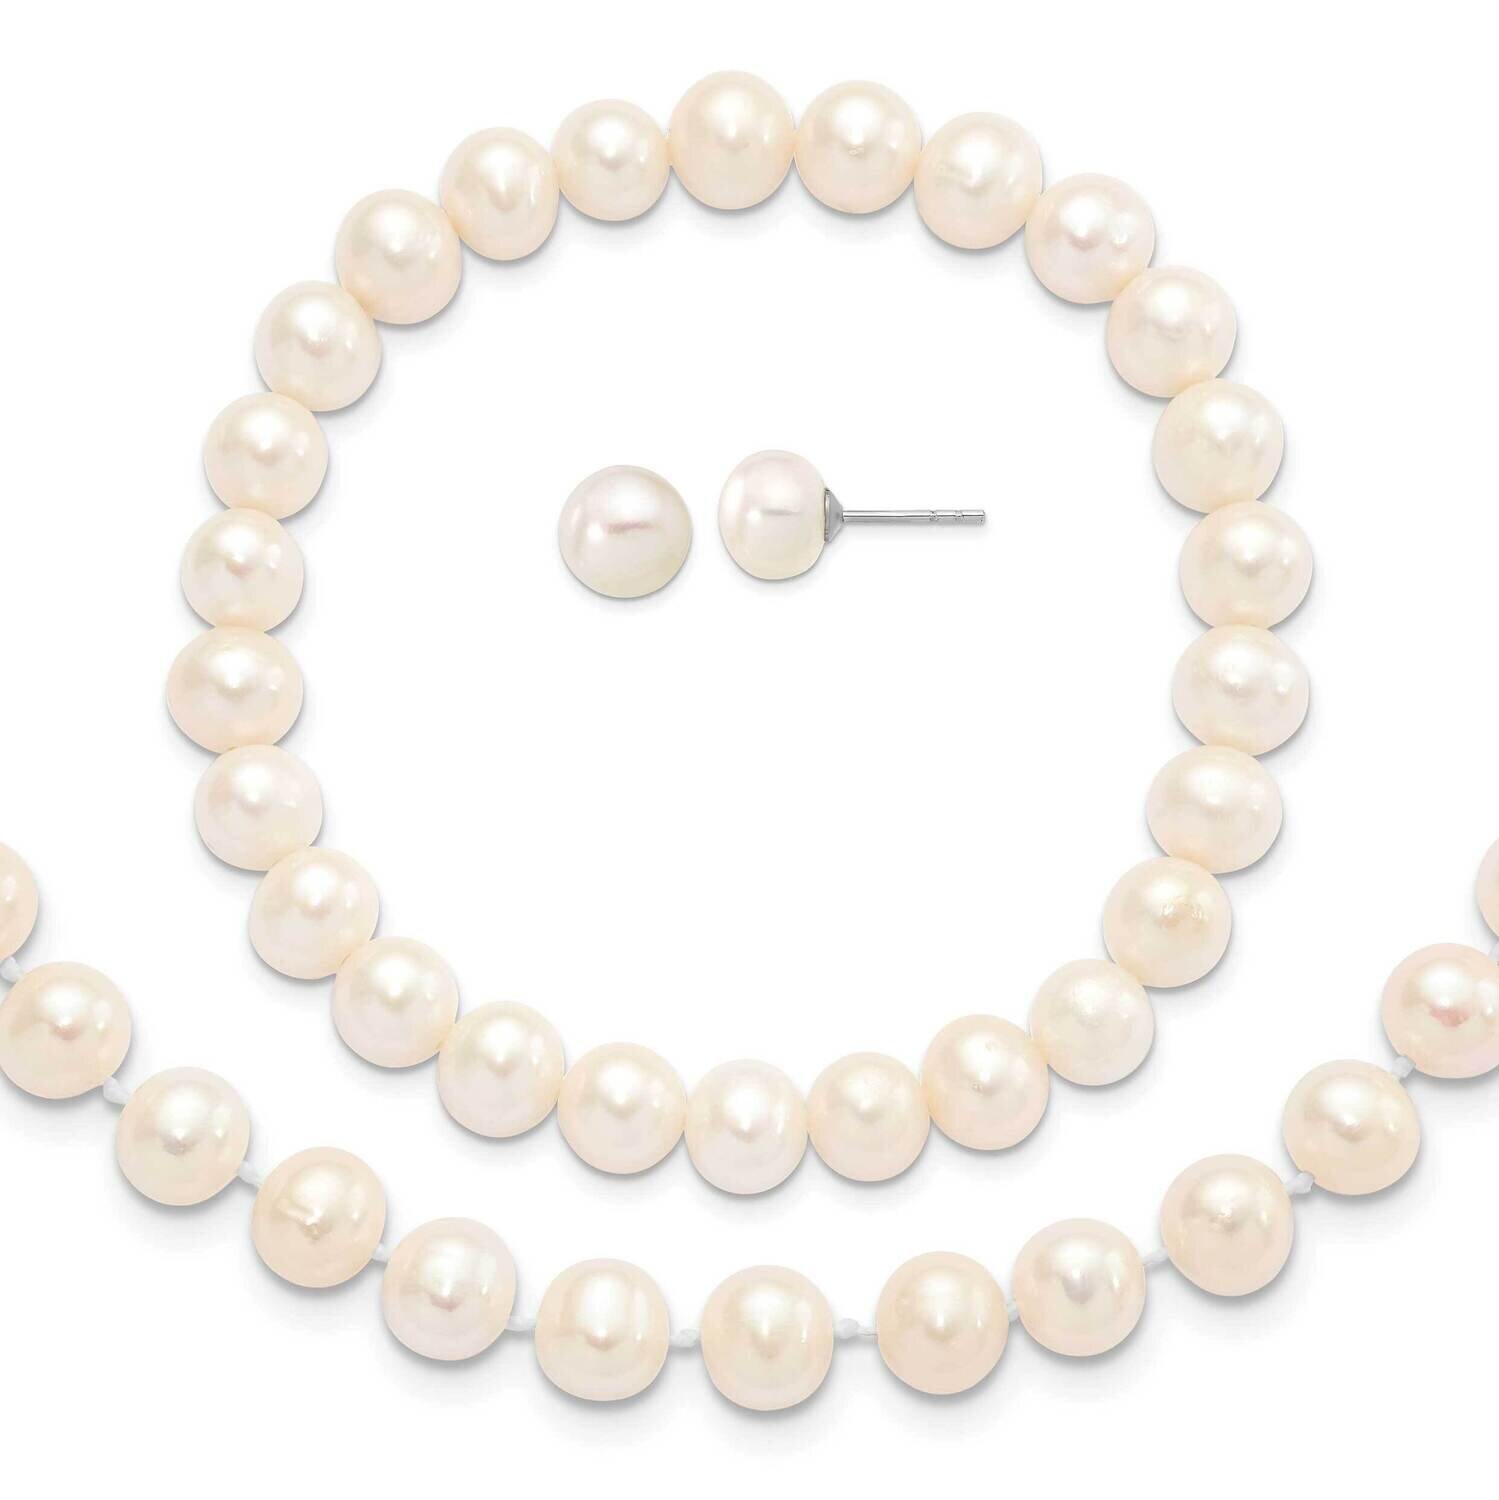 7-8mm White Cultured Freshwater Pearl Earring Bracelet Necklace Set Sterling Silver Rhodium-plated QH5636SET